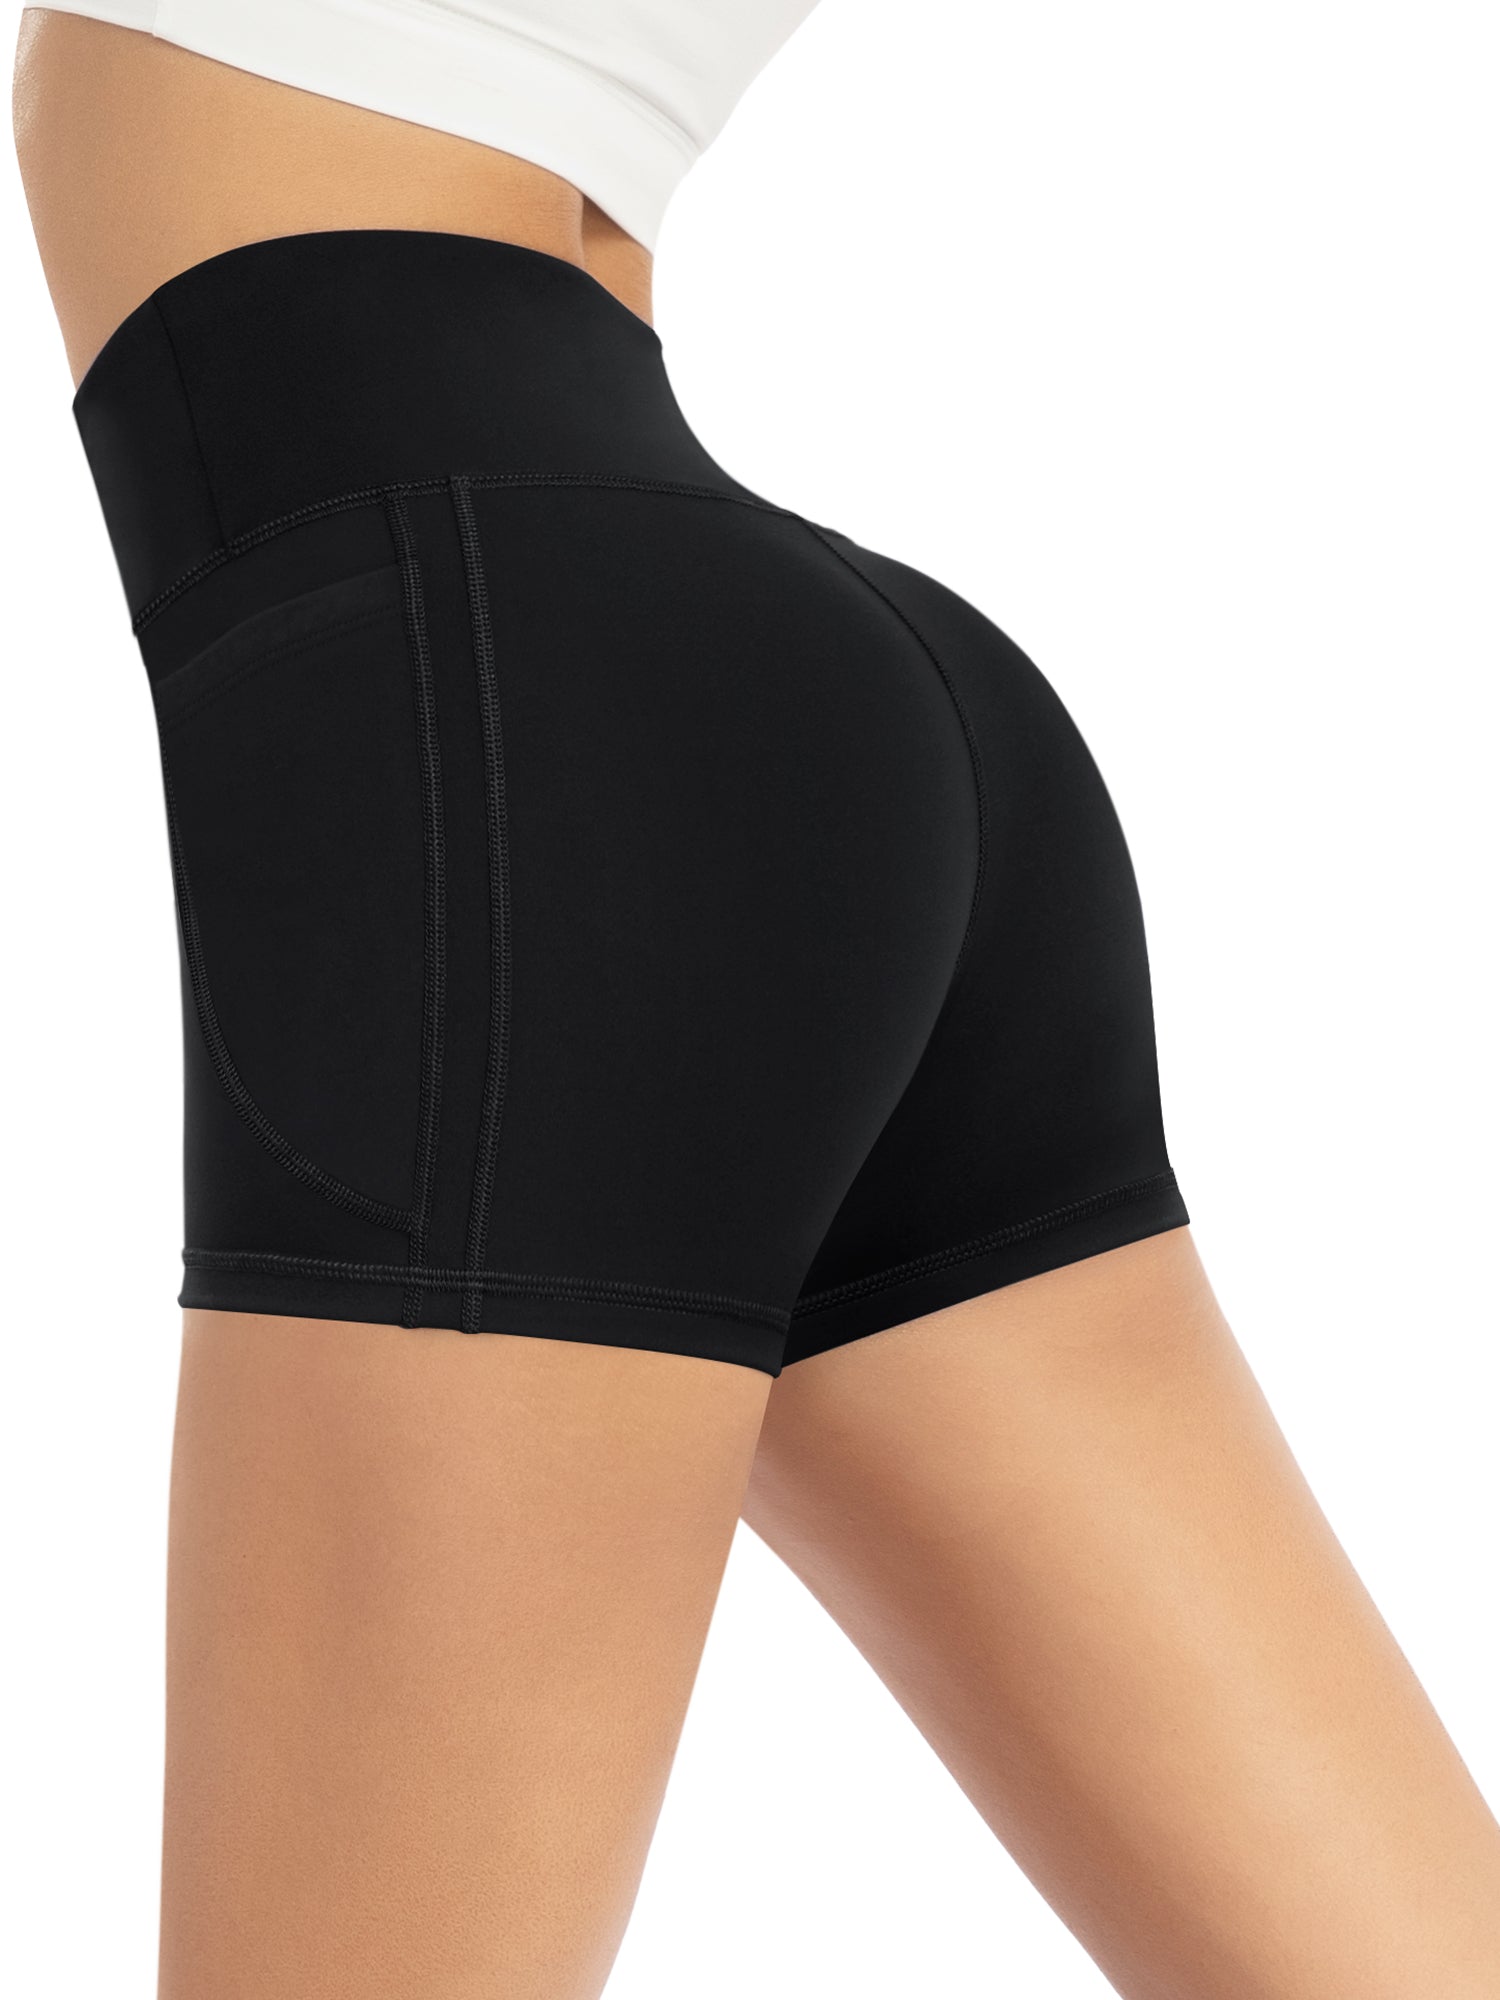 GOFIEP Biker Shorts for Women - Gym Yoga Workout Running Spandex High Waisted Athletic Volleyball Shorts with Pockets